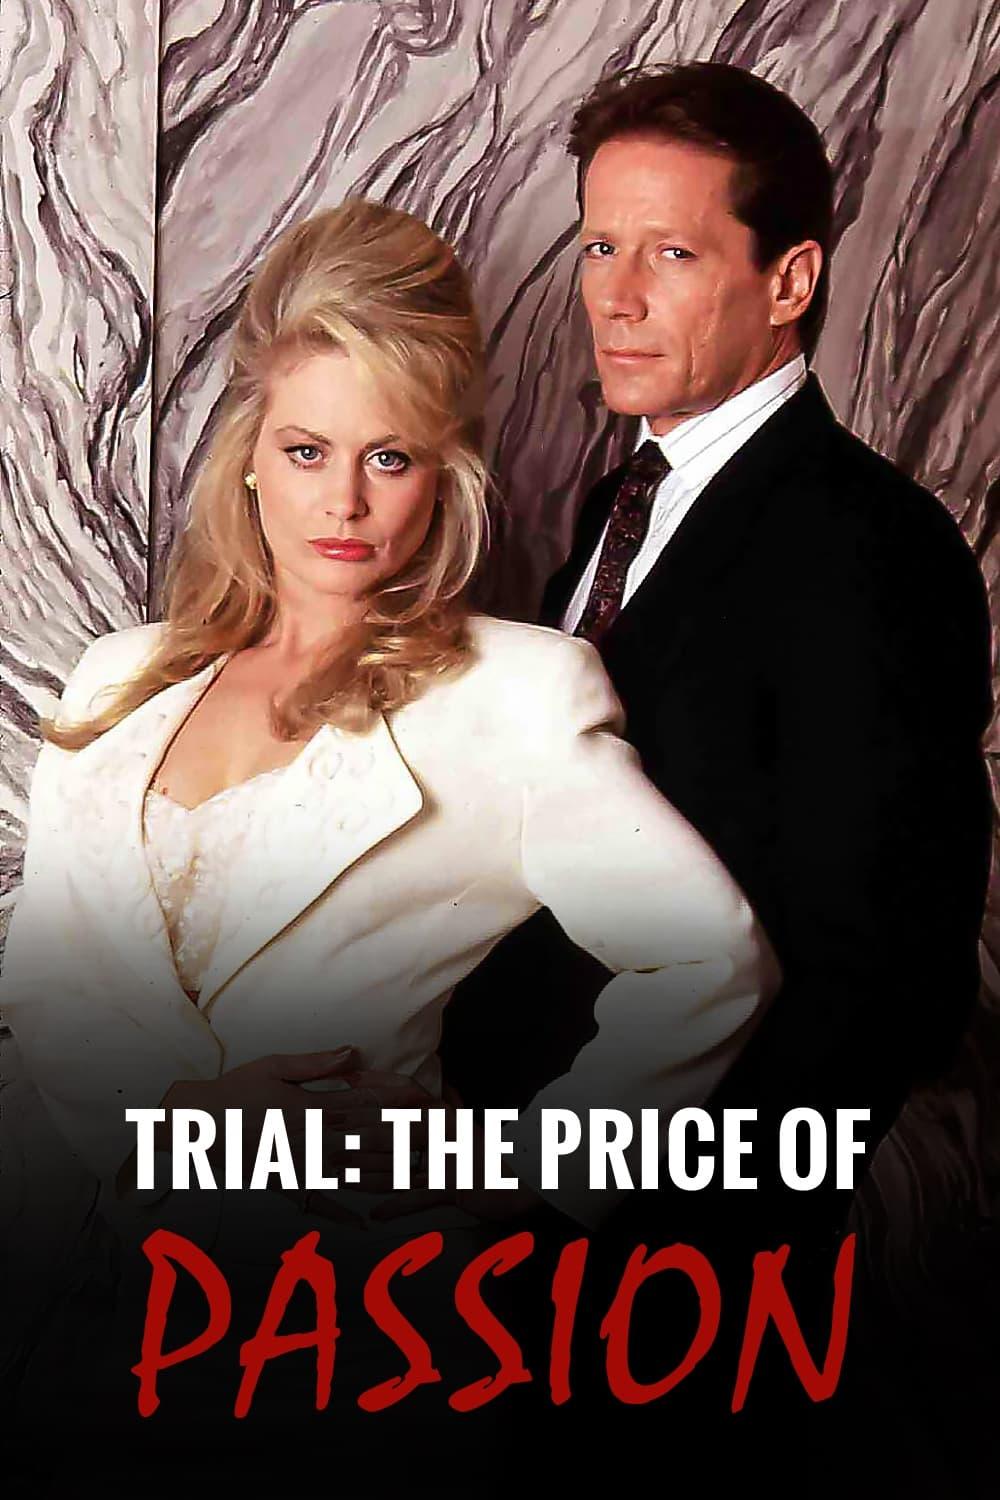 Trial: The Price of Passion poster